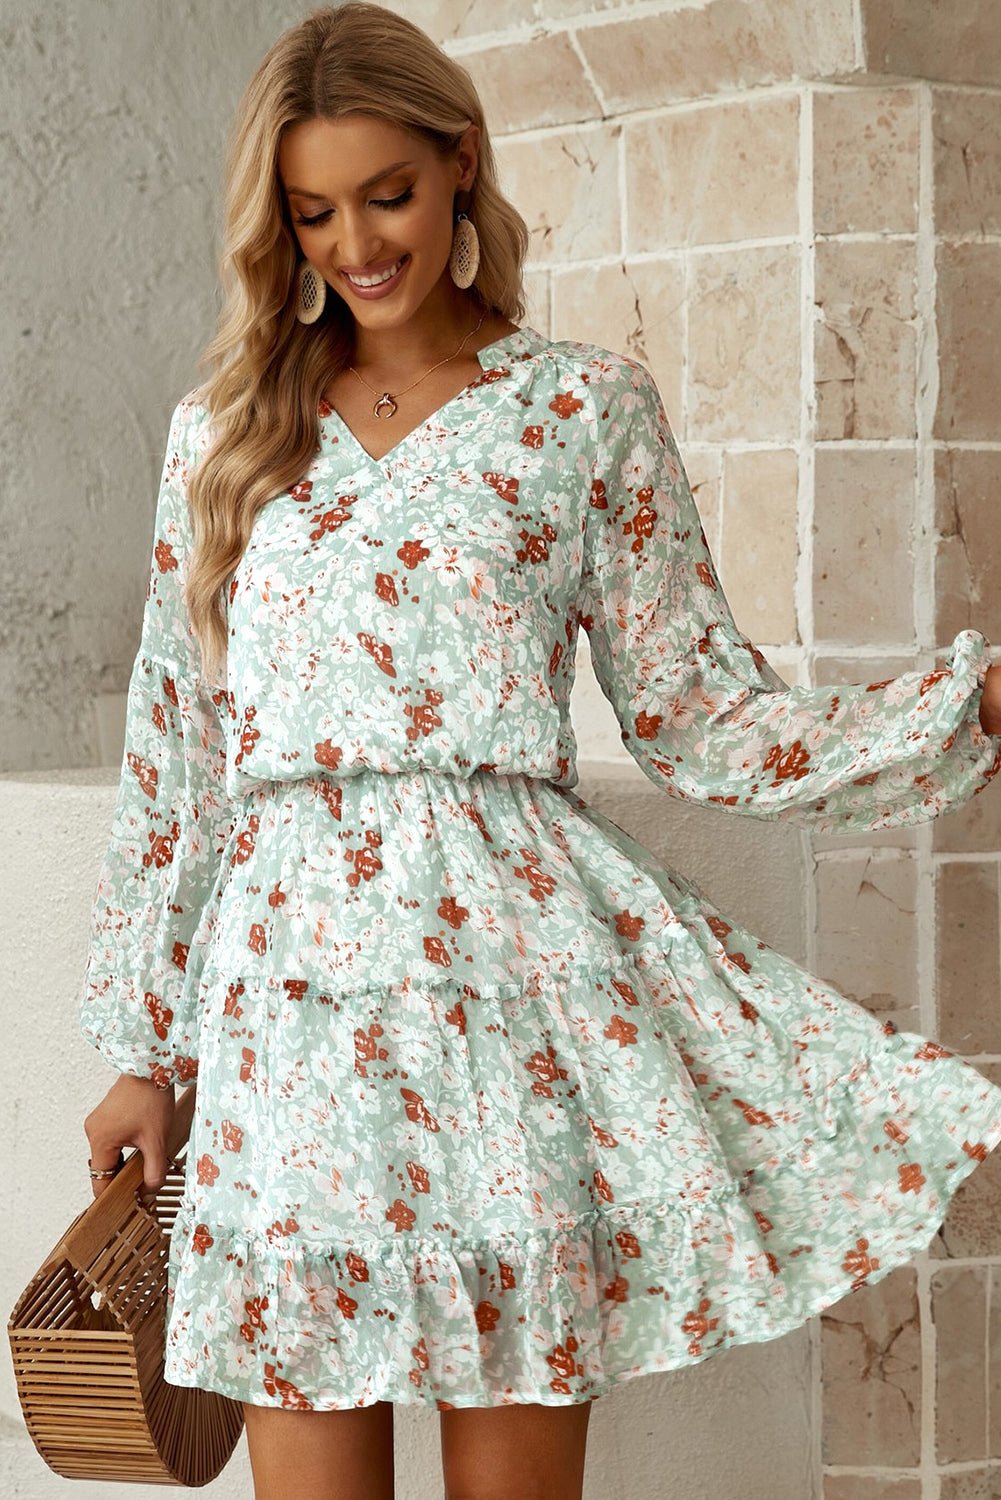 Women's Floral Frill Trim Puff Sleeve Notched Neck Dress